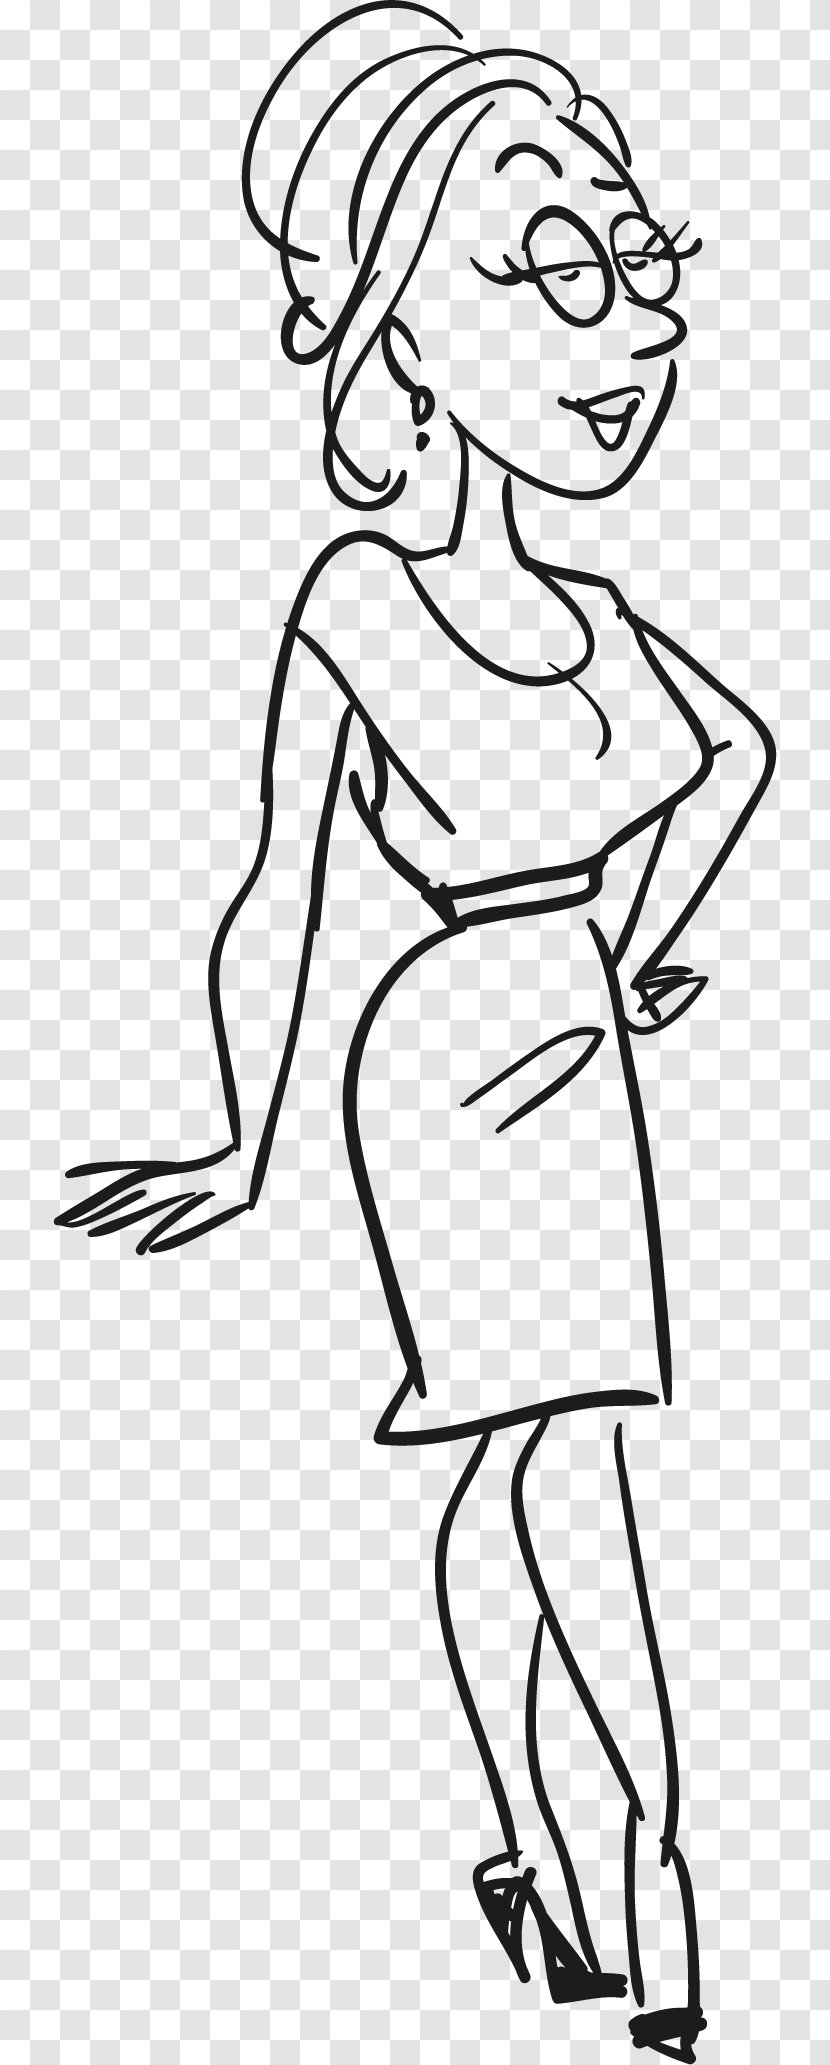 Black And White Clip Art - Cartoon - Woman With Hip Transparent PNG